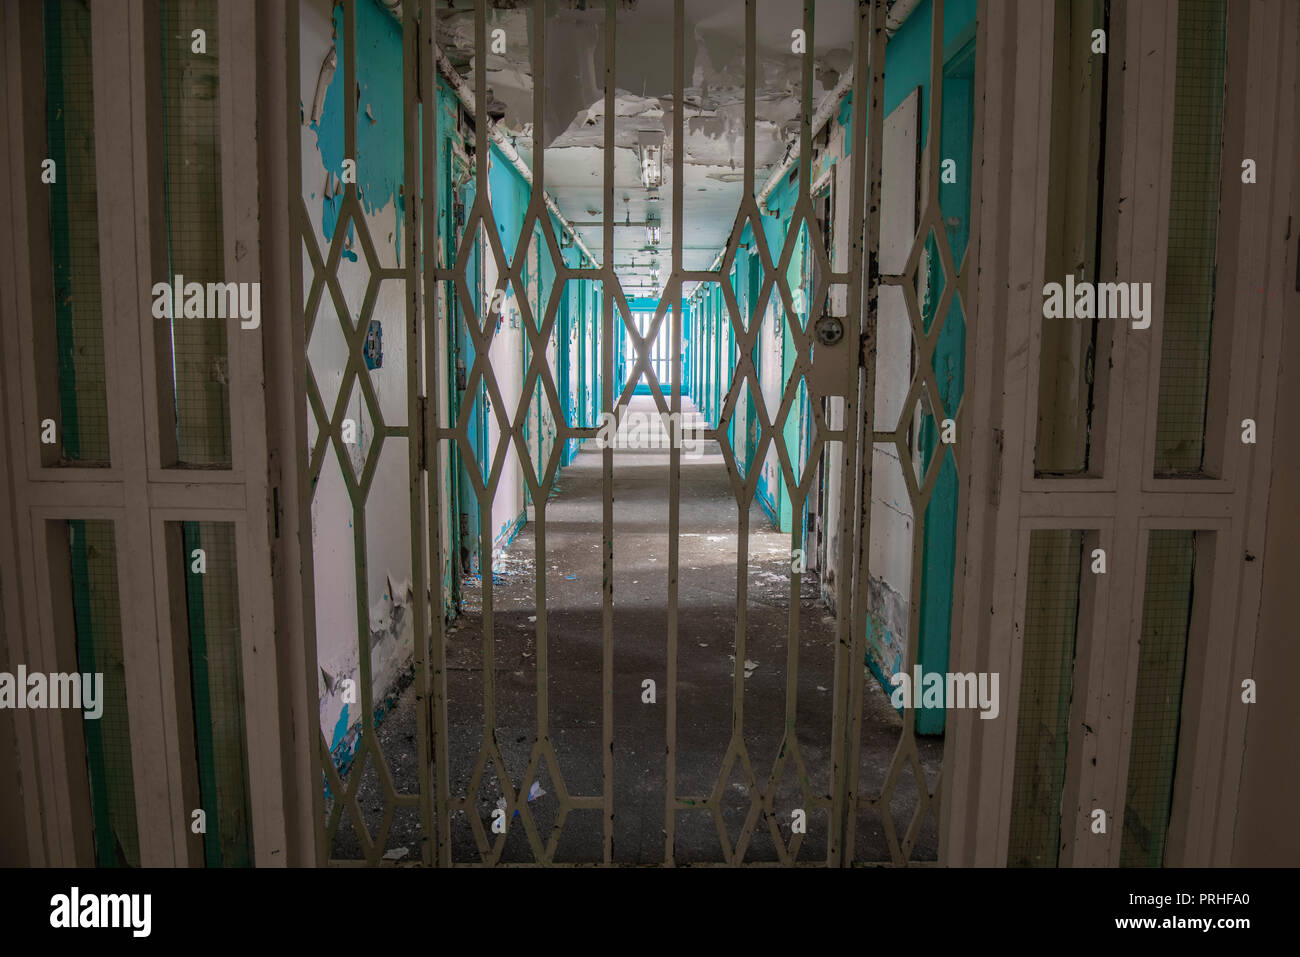 Steel gate across the corridor of prison cell doors inside an abandoned prison. Stock Photo